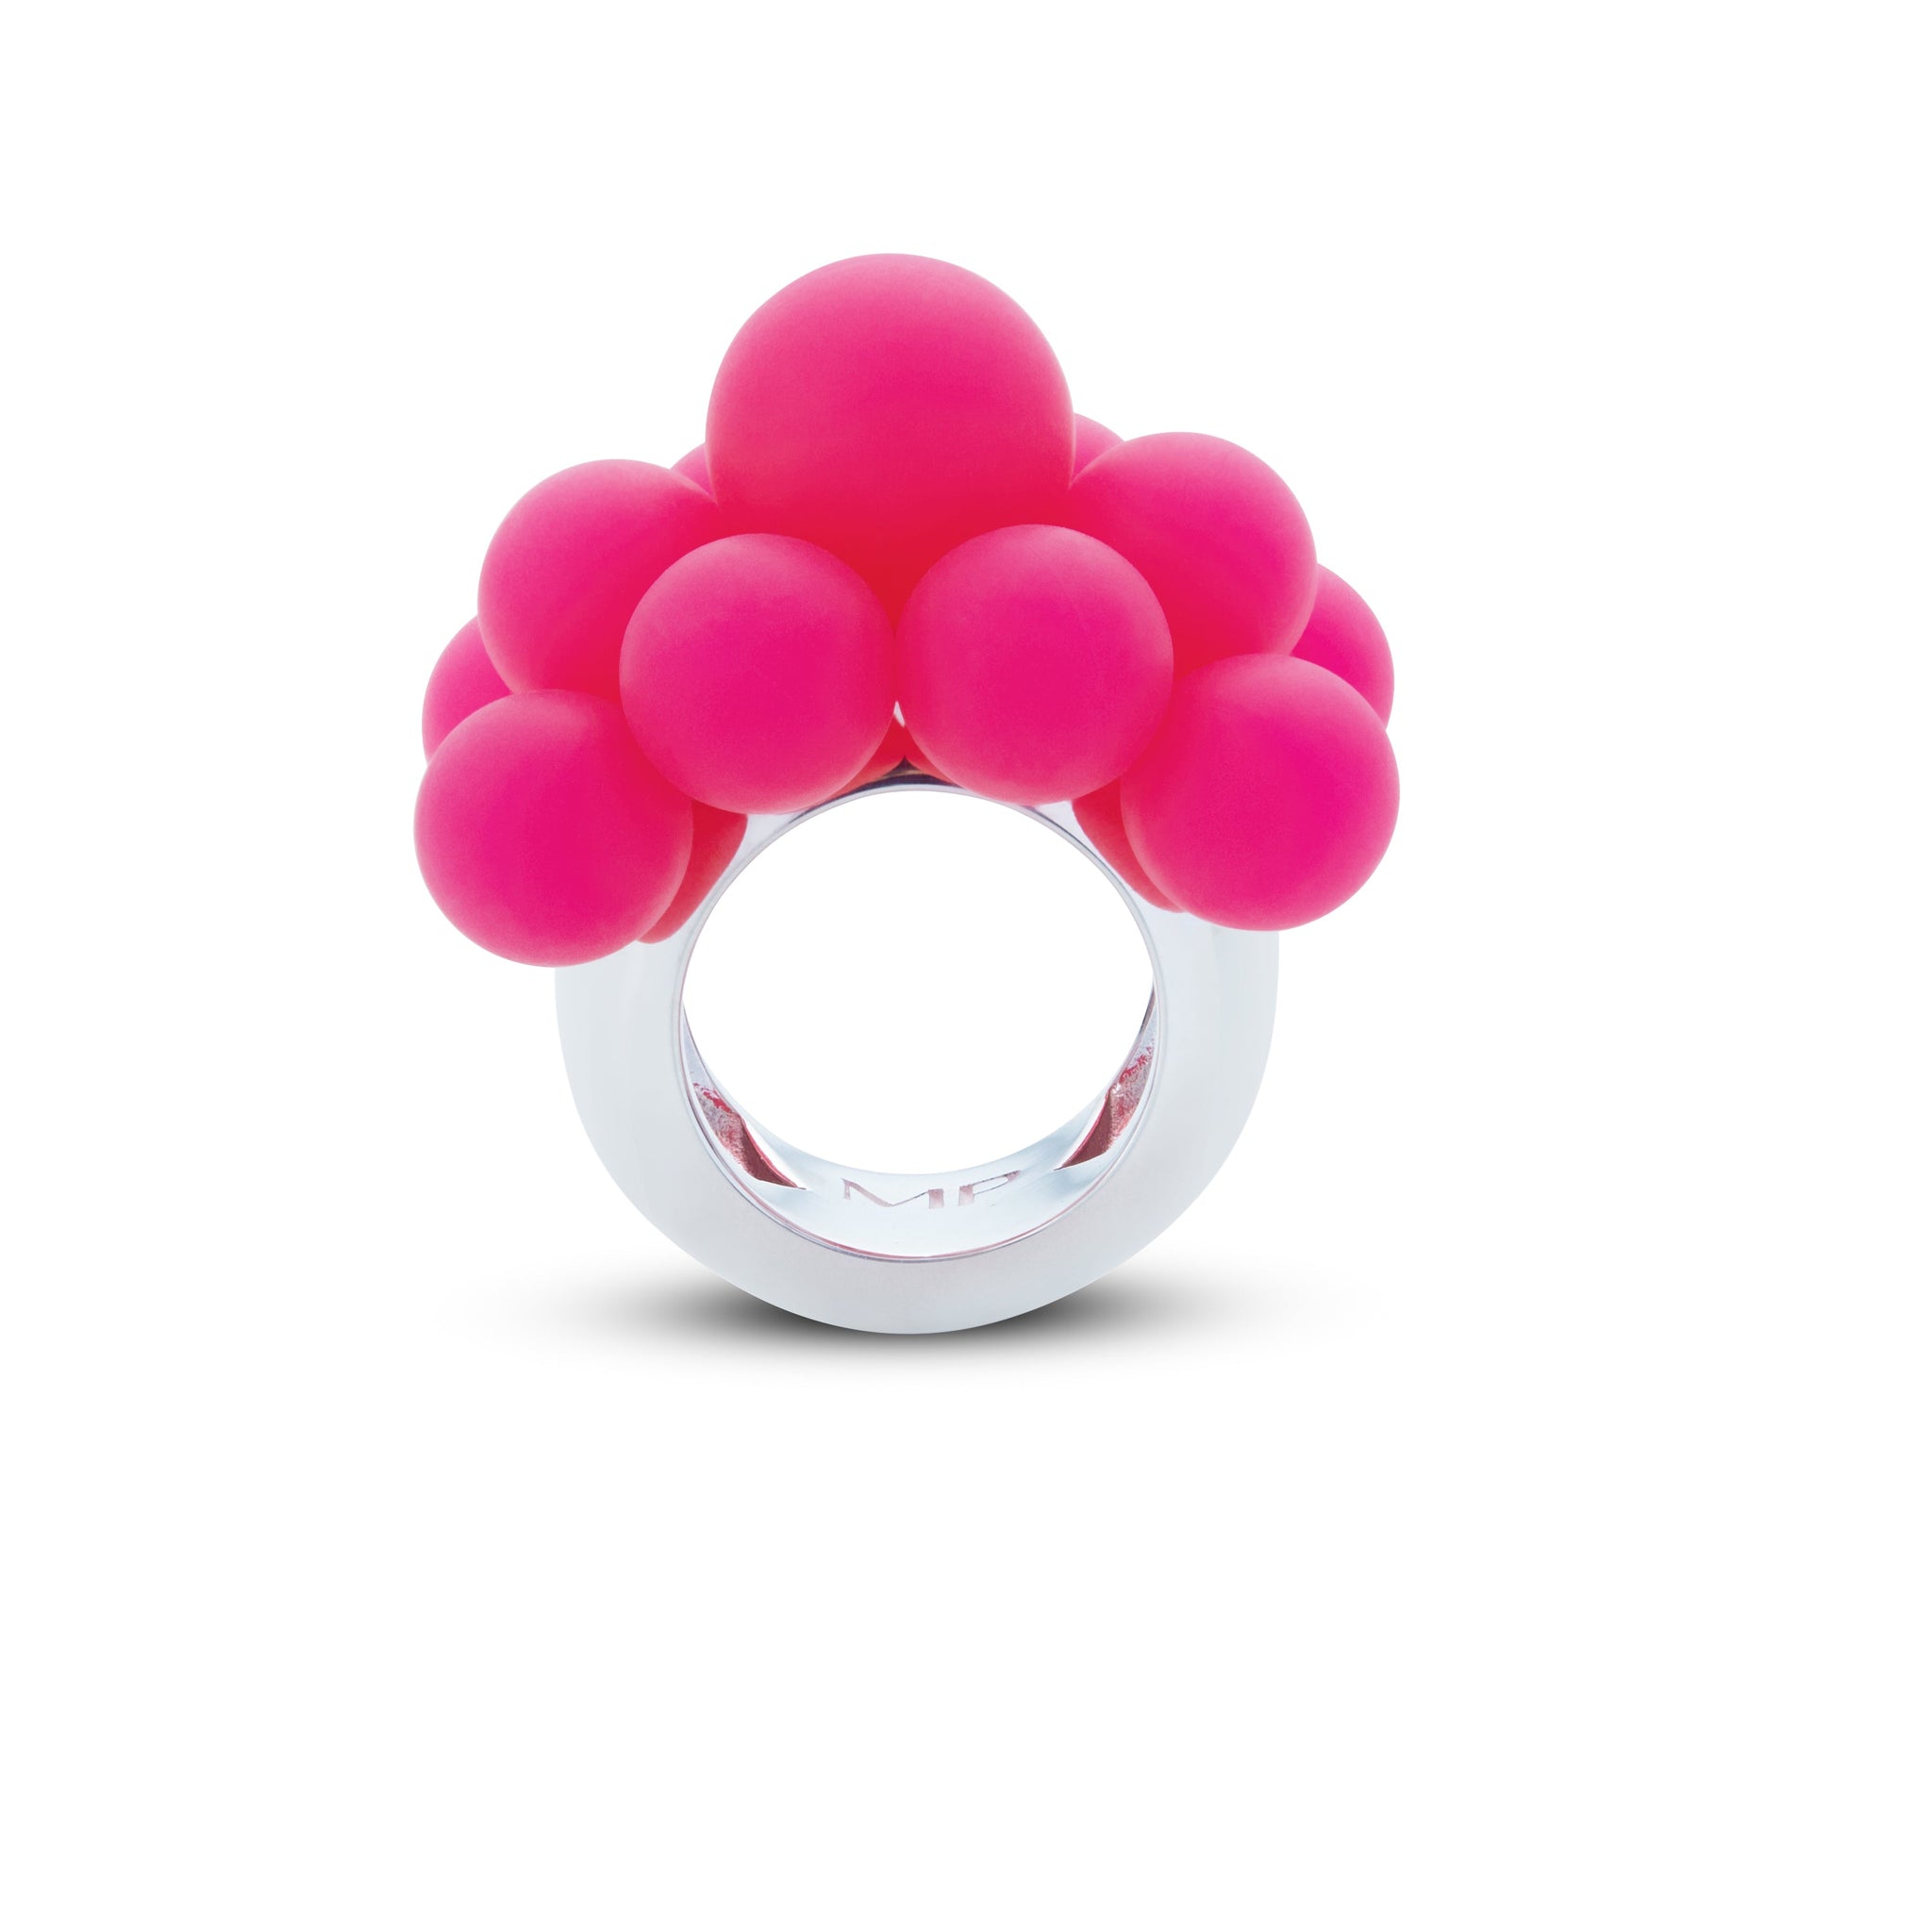 Madame Palm cocktail ring self-love in fuchsia silicone pearls and white gold 18kt band